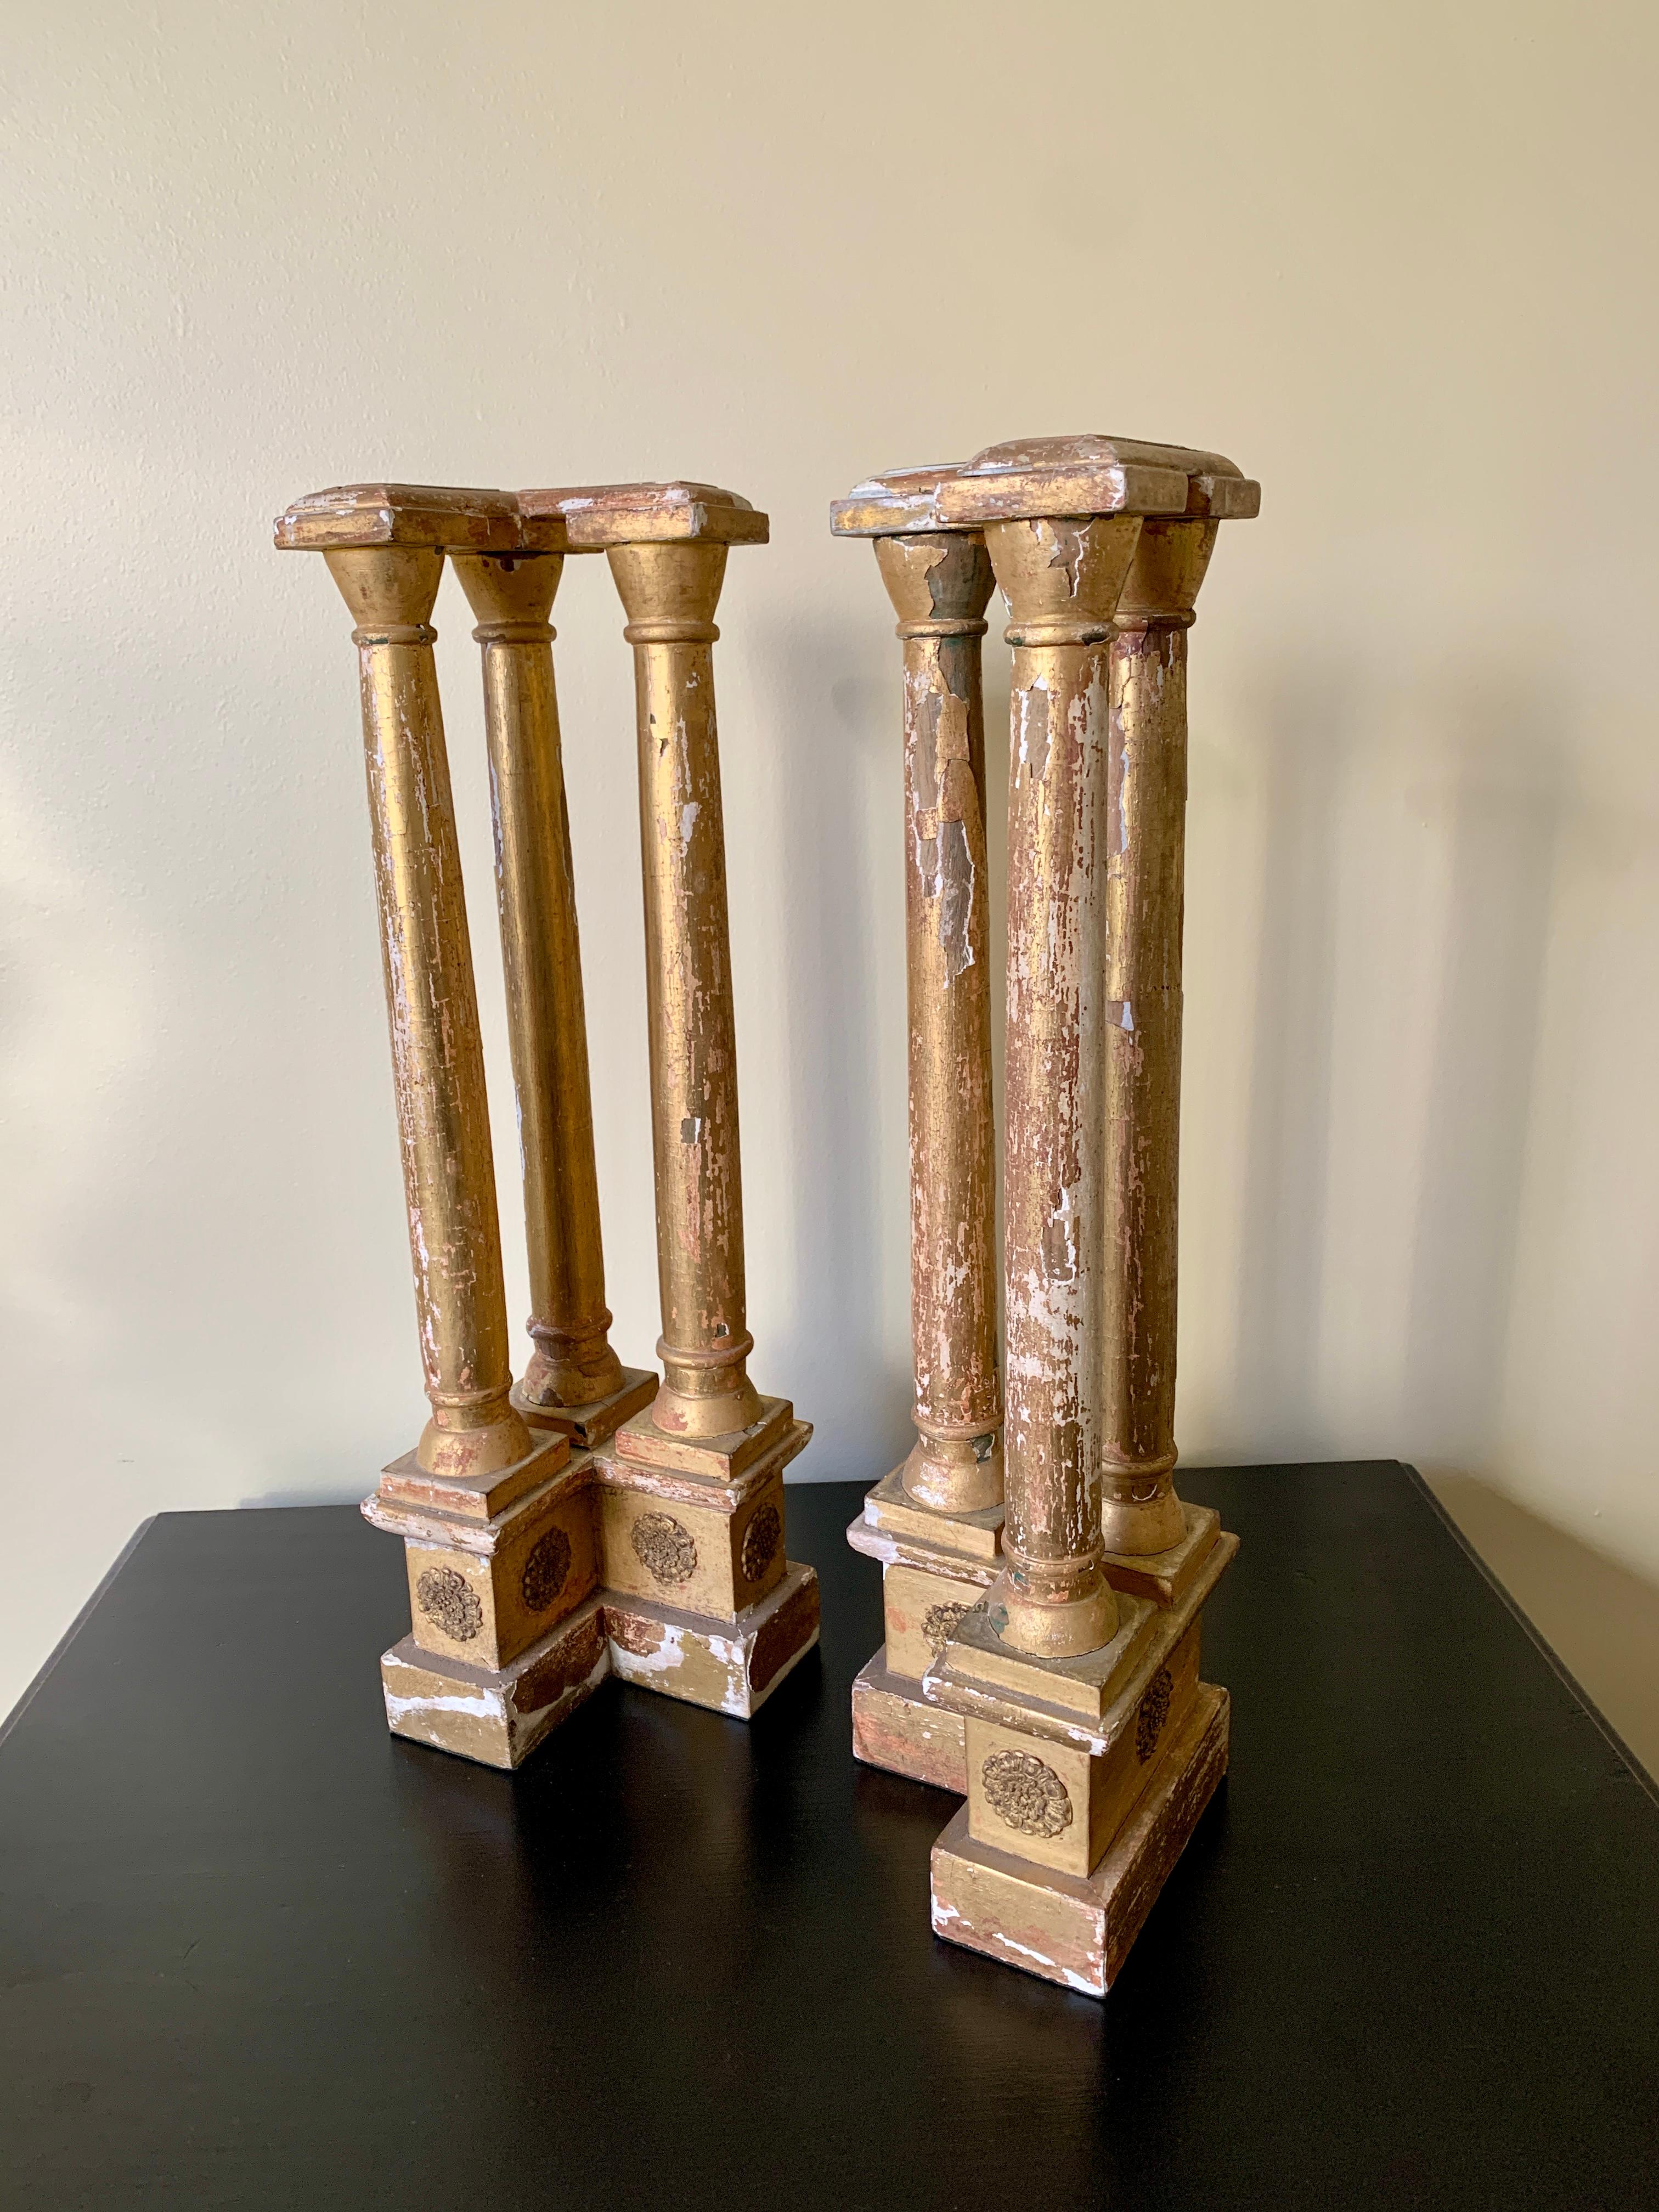 Antique Neoclassical Grand Tour Giltwood Architectural Columns, a Pair In Good Condition For Sale In Elkhart, IN